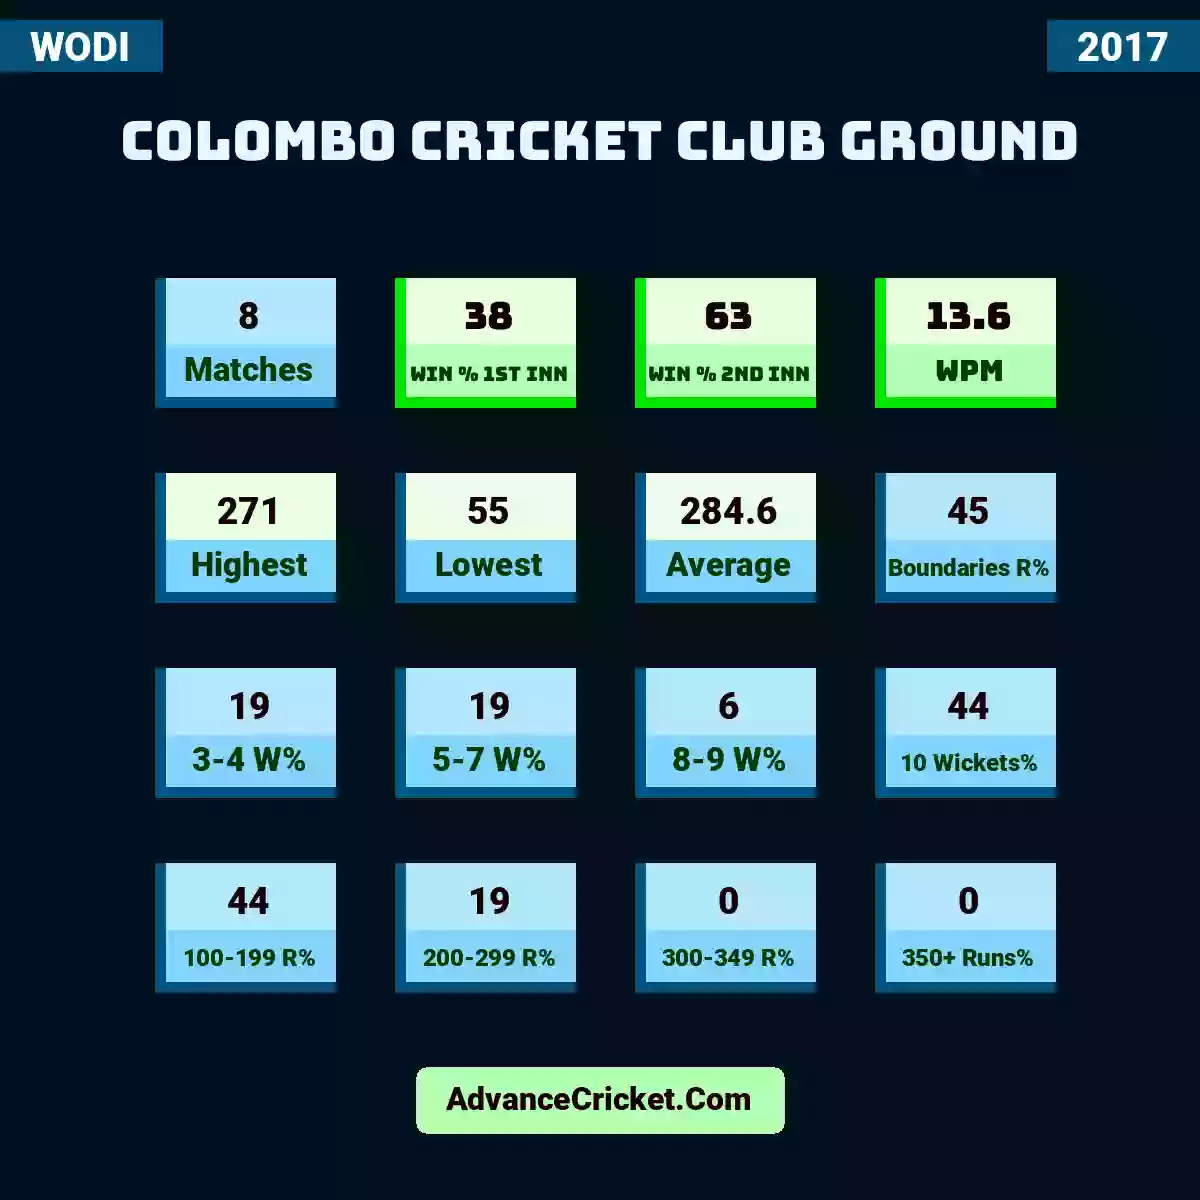 Image showing Colombo Cricket Club Ground with Matches: 8, Win % 1st Inn: 38, Win % 2nd Inn: 63, WPM: 13.6, Highest: 271, Lowest: 55, Average: 284.6, Boundaries R%: 45, 3-4 W%: 19, 5-7 W%: 19, 8-9 W%: 6, 10 Wickets%: 44, 100-199 R%: 44, 200-299 R%: 19, 300-349 R%: 0, 350+ Runs%: 0.